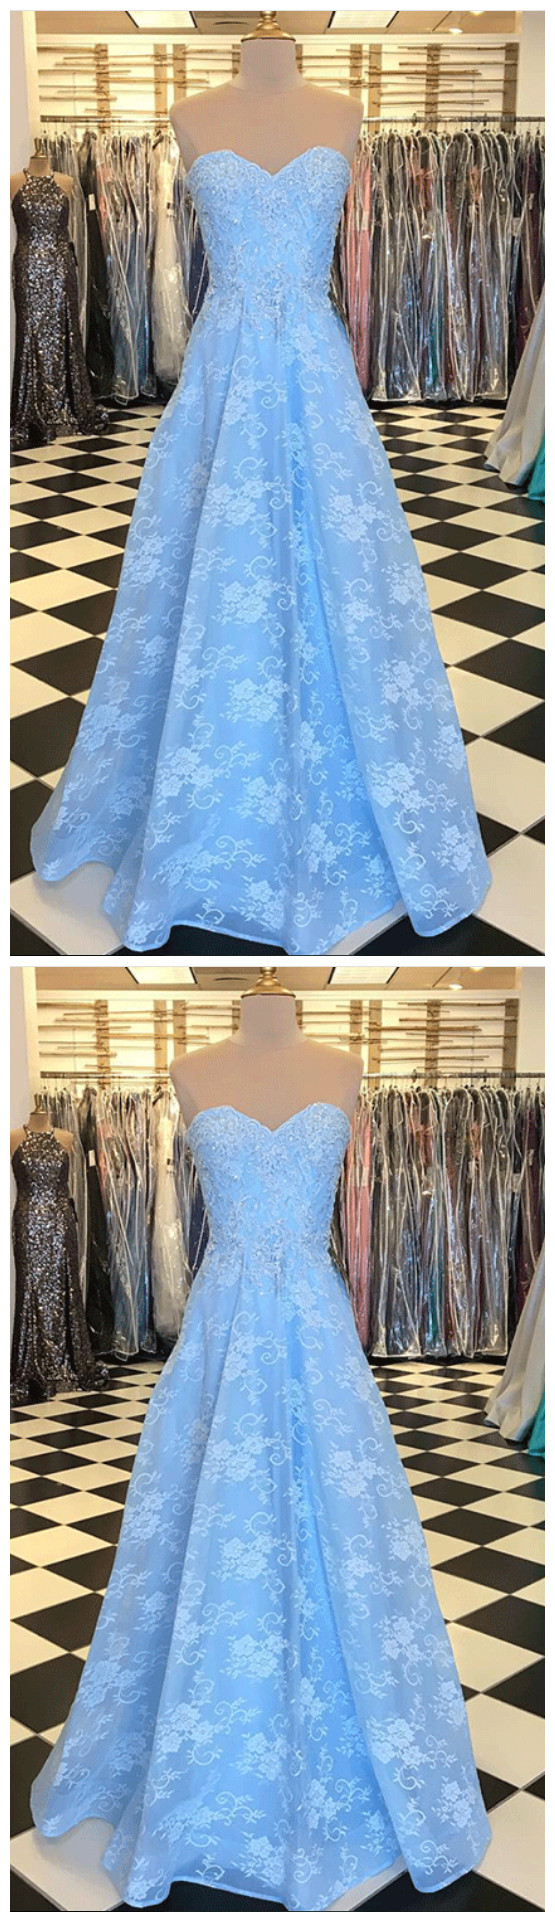 Blue Lace Sweetheart Neck Long Strapless Prom Dress, Evening Dress